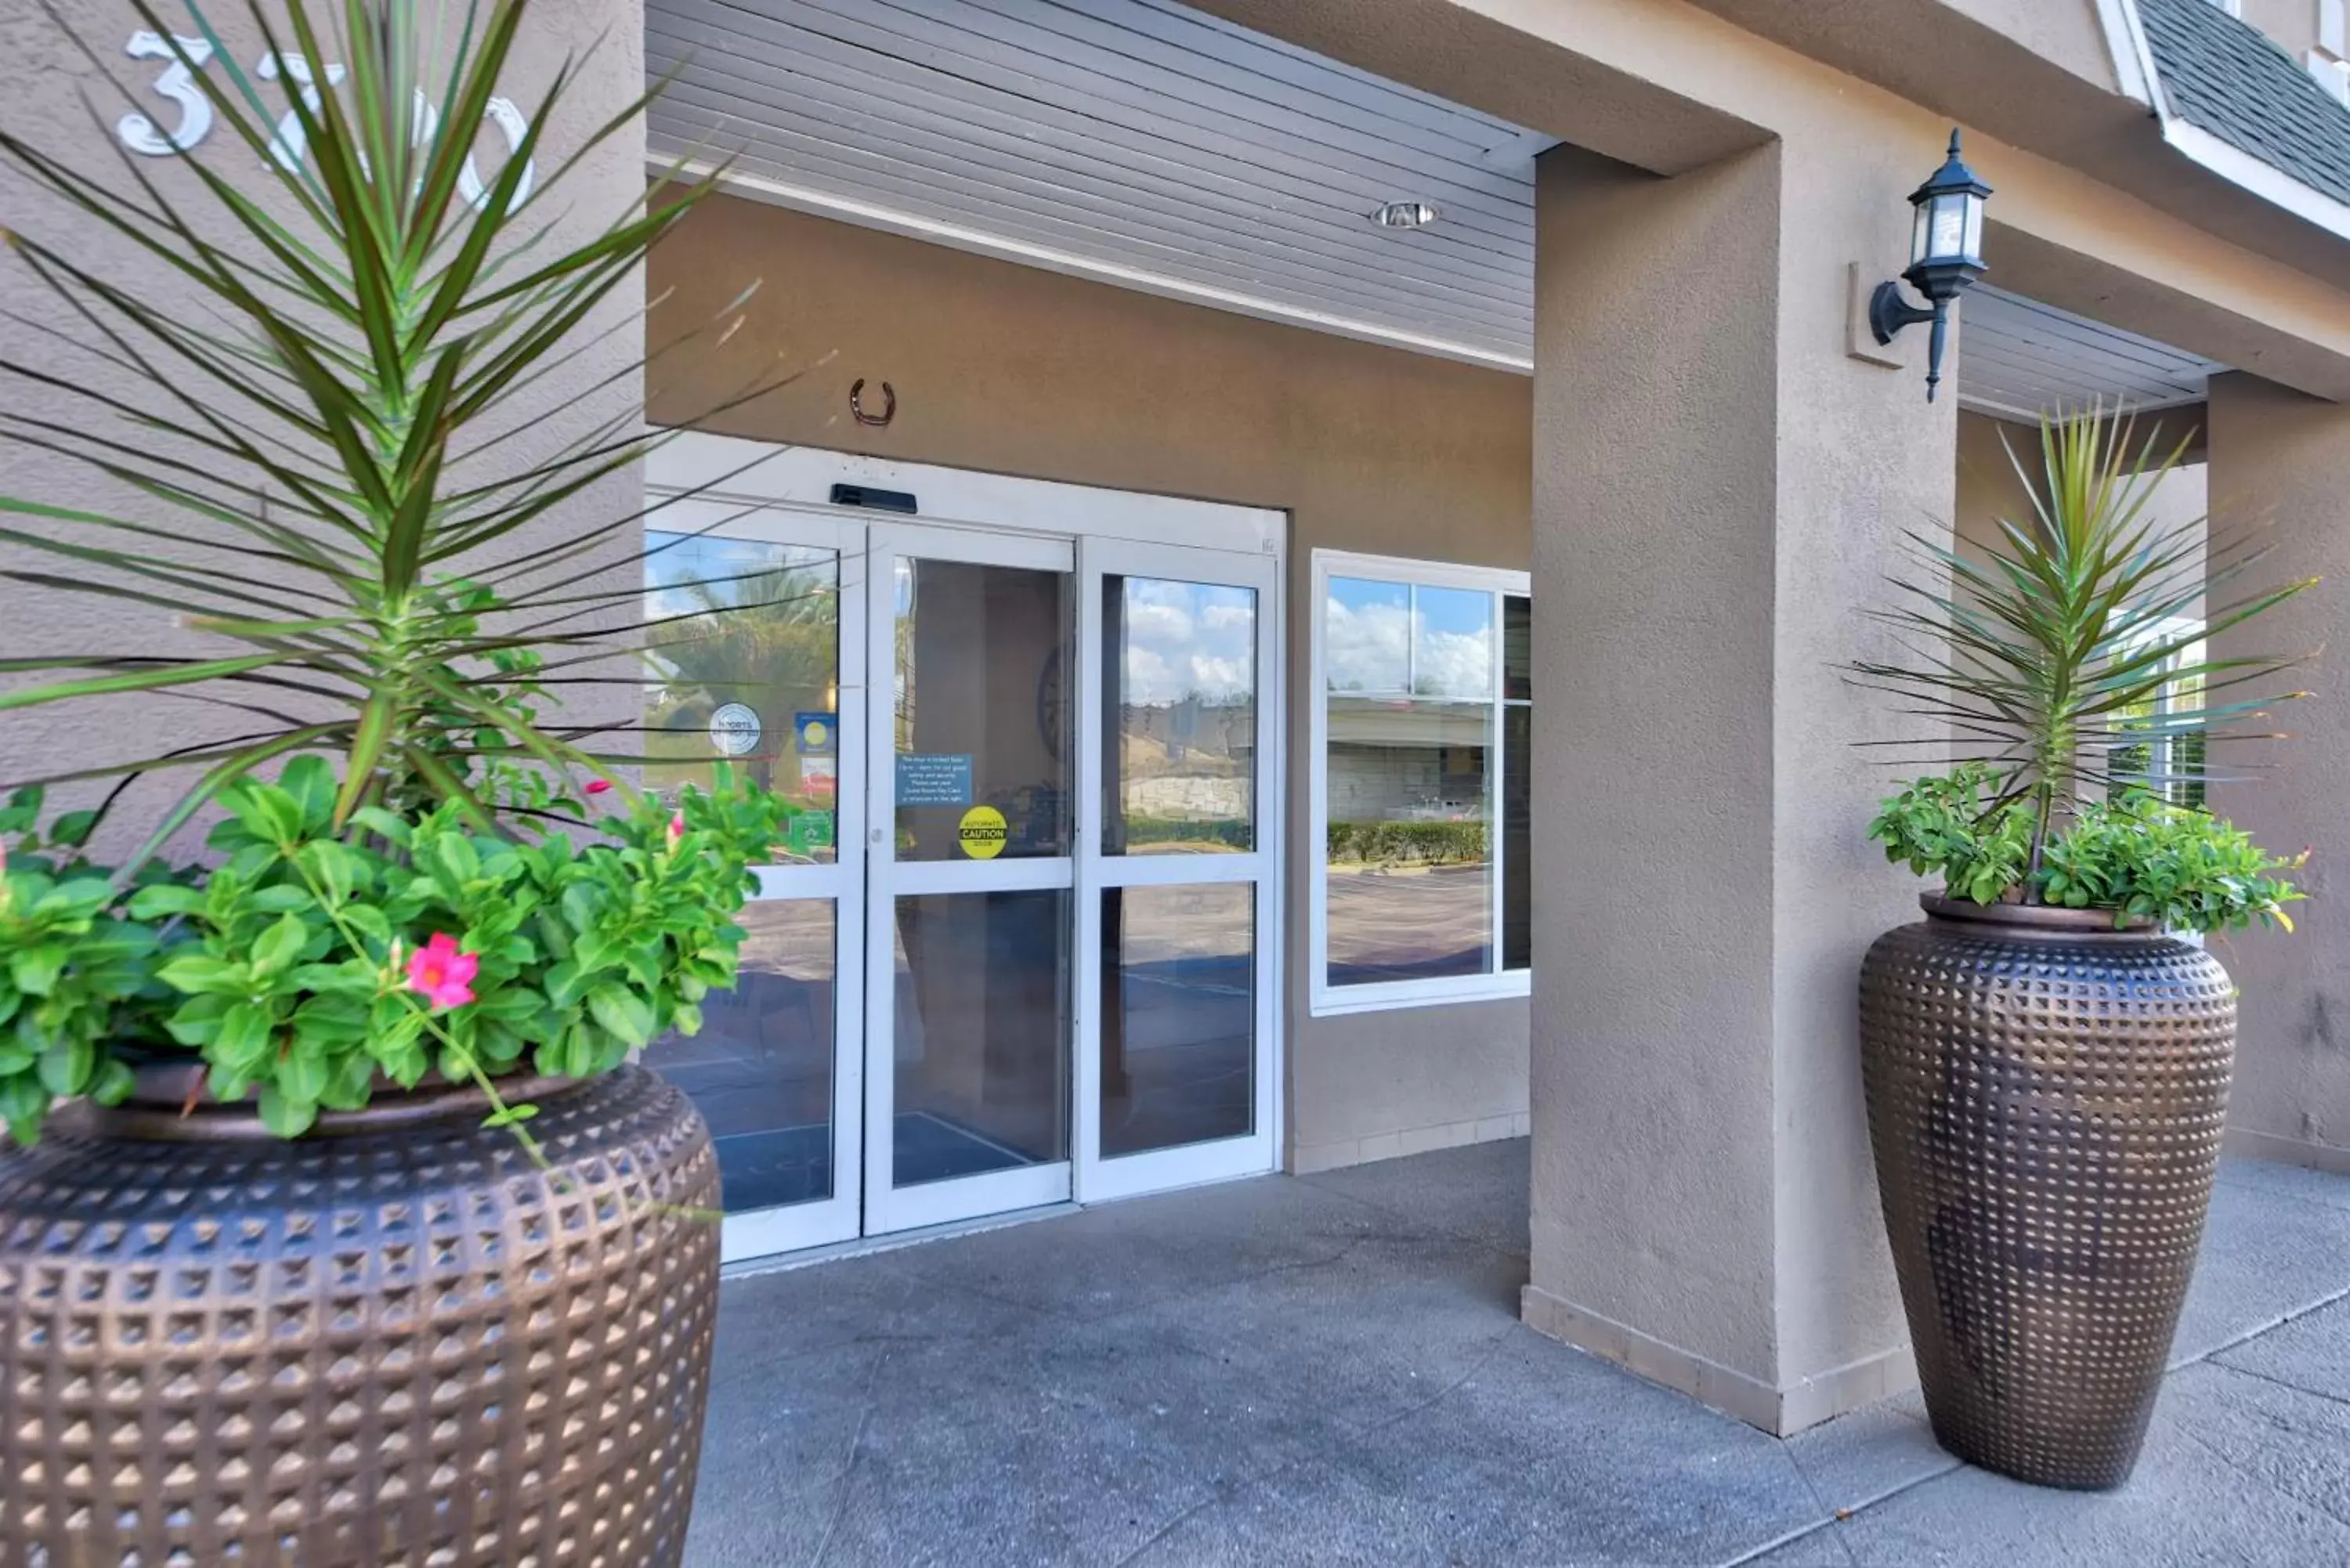 Property building in Country Inn & Suites by Radisson, Ocala, FL